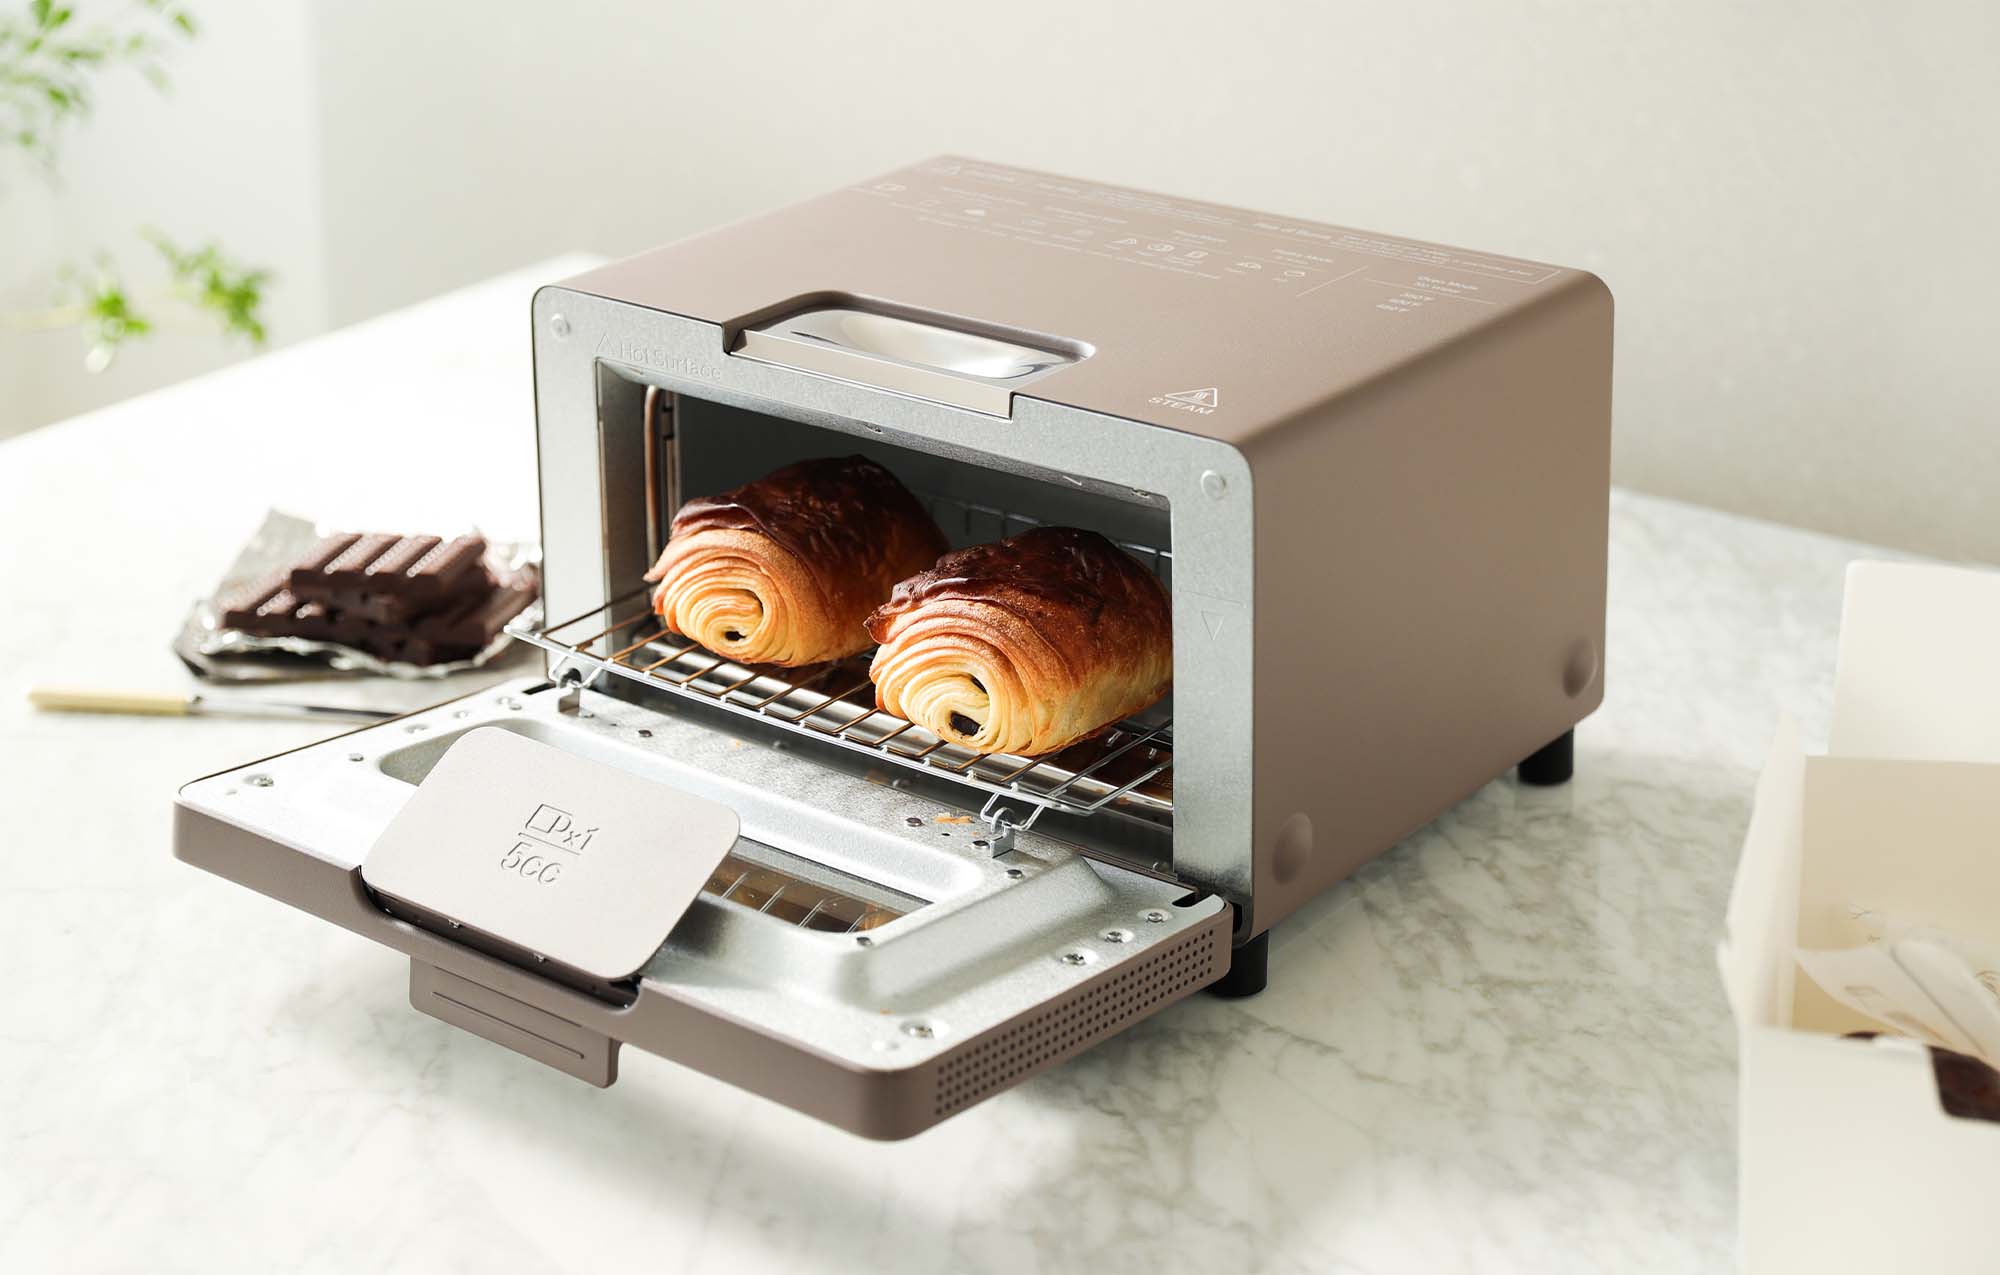 Toaster bakes bread while humidifying it - Japan Today